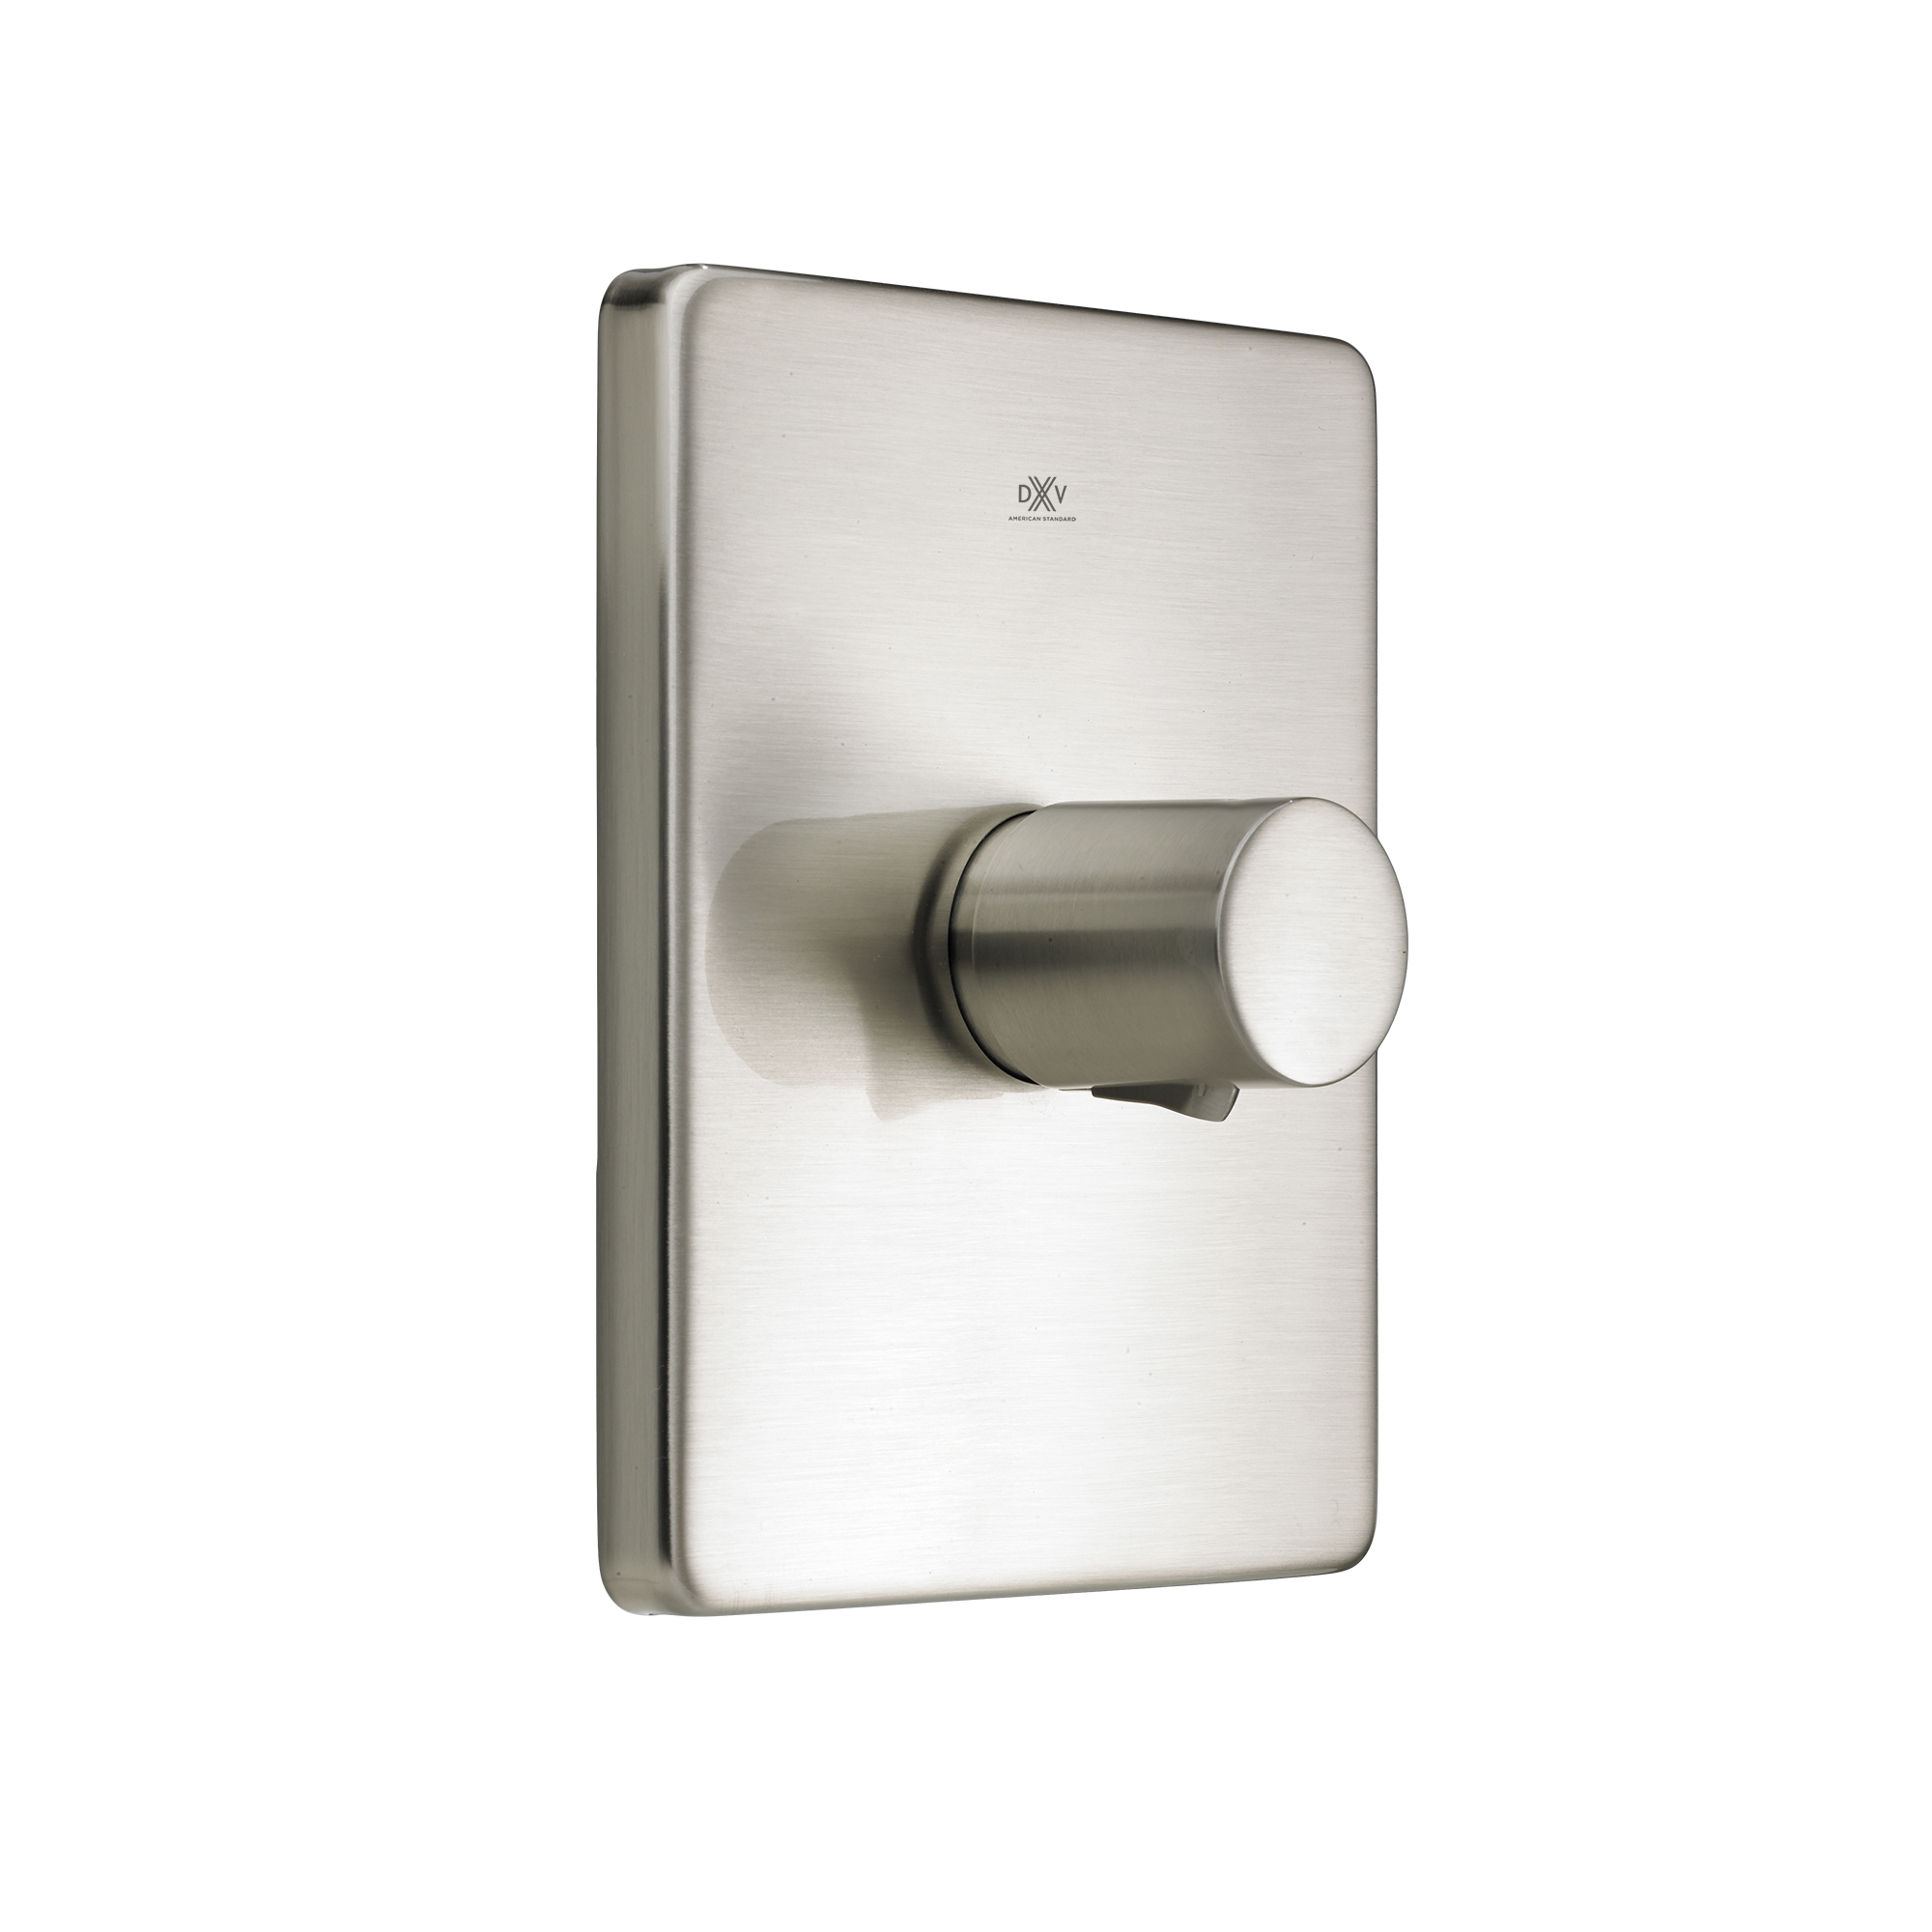 Rem 1/2 Inch or 3/4 Inch Thermostatic Valve Trim